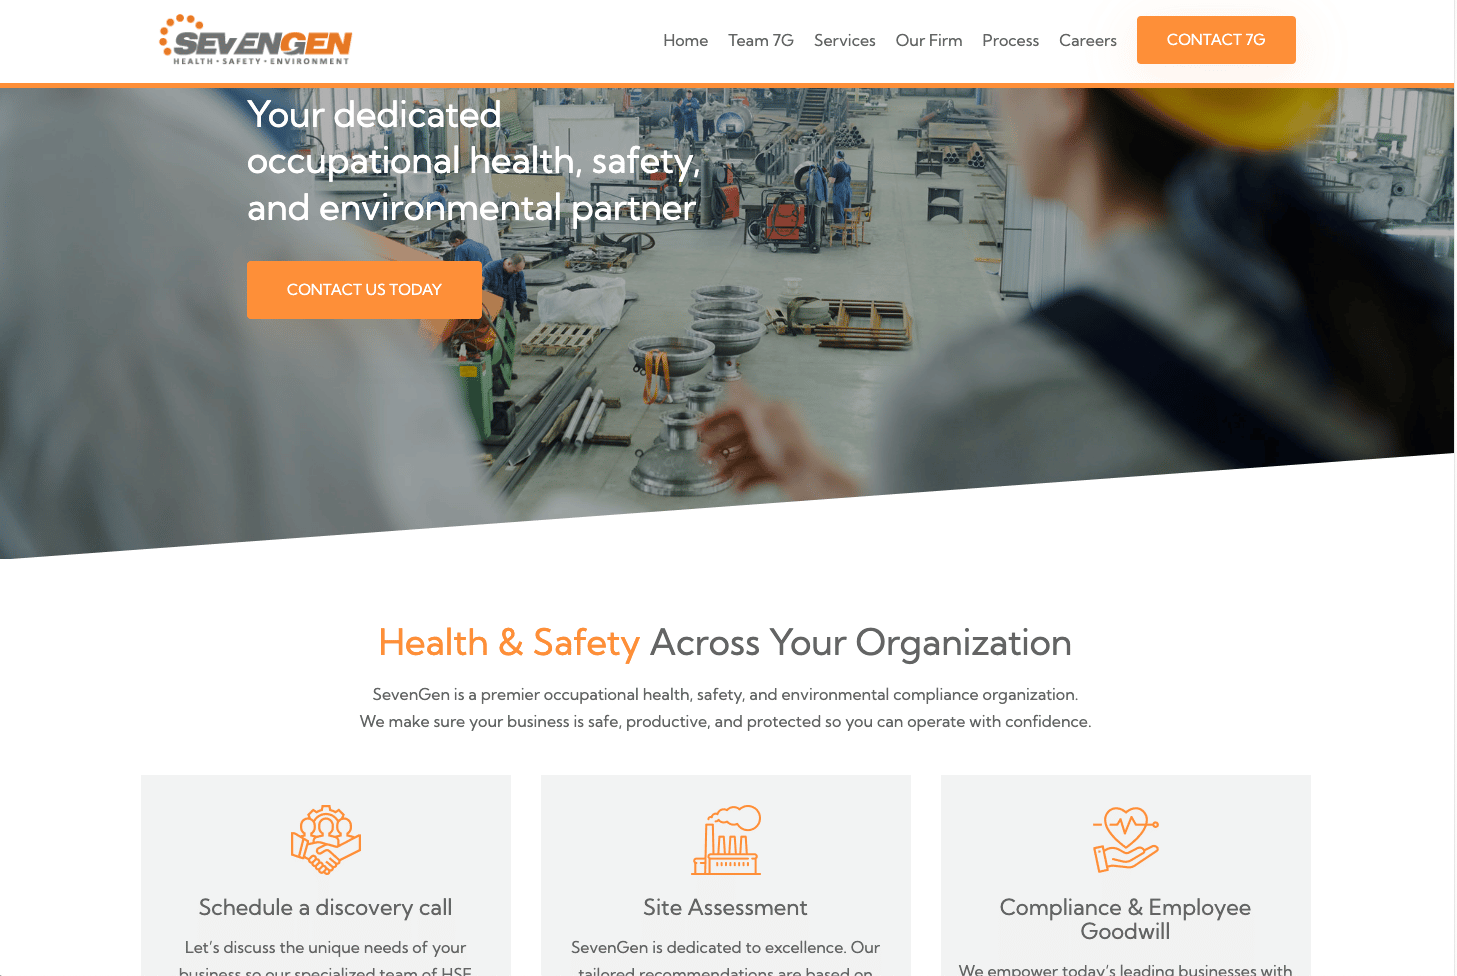 How SevenGen is Keeping Workers Safe and Bringing in Customers with Their New Website